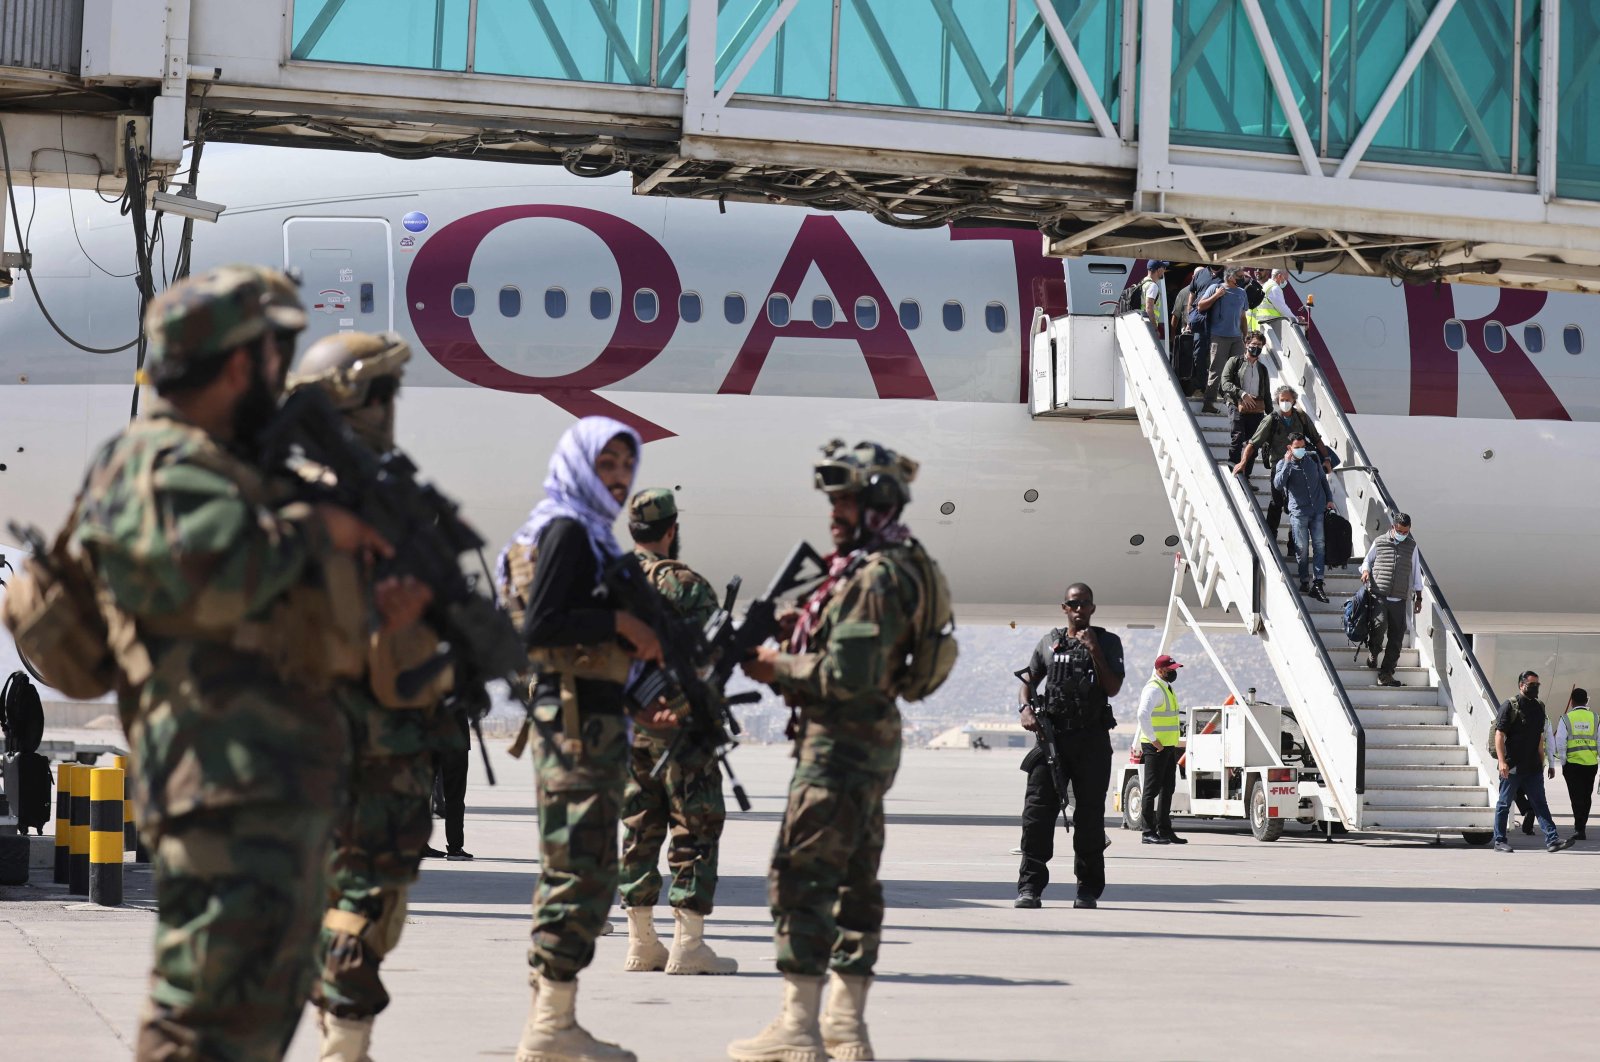 Fighters of the Taliban Badri 313 military unit stand guard as passengers on board a Qatar Airways aircraft disembark at the airport in Kabul, Afghanistan, Sept. 14, 2021. (AFP File Photo)